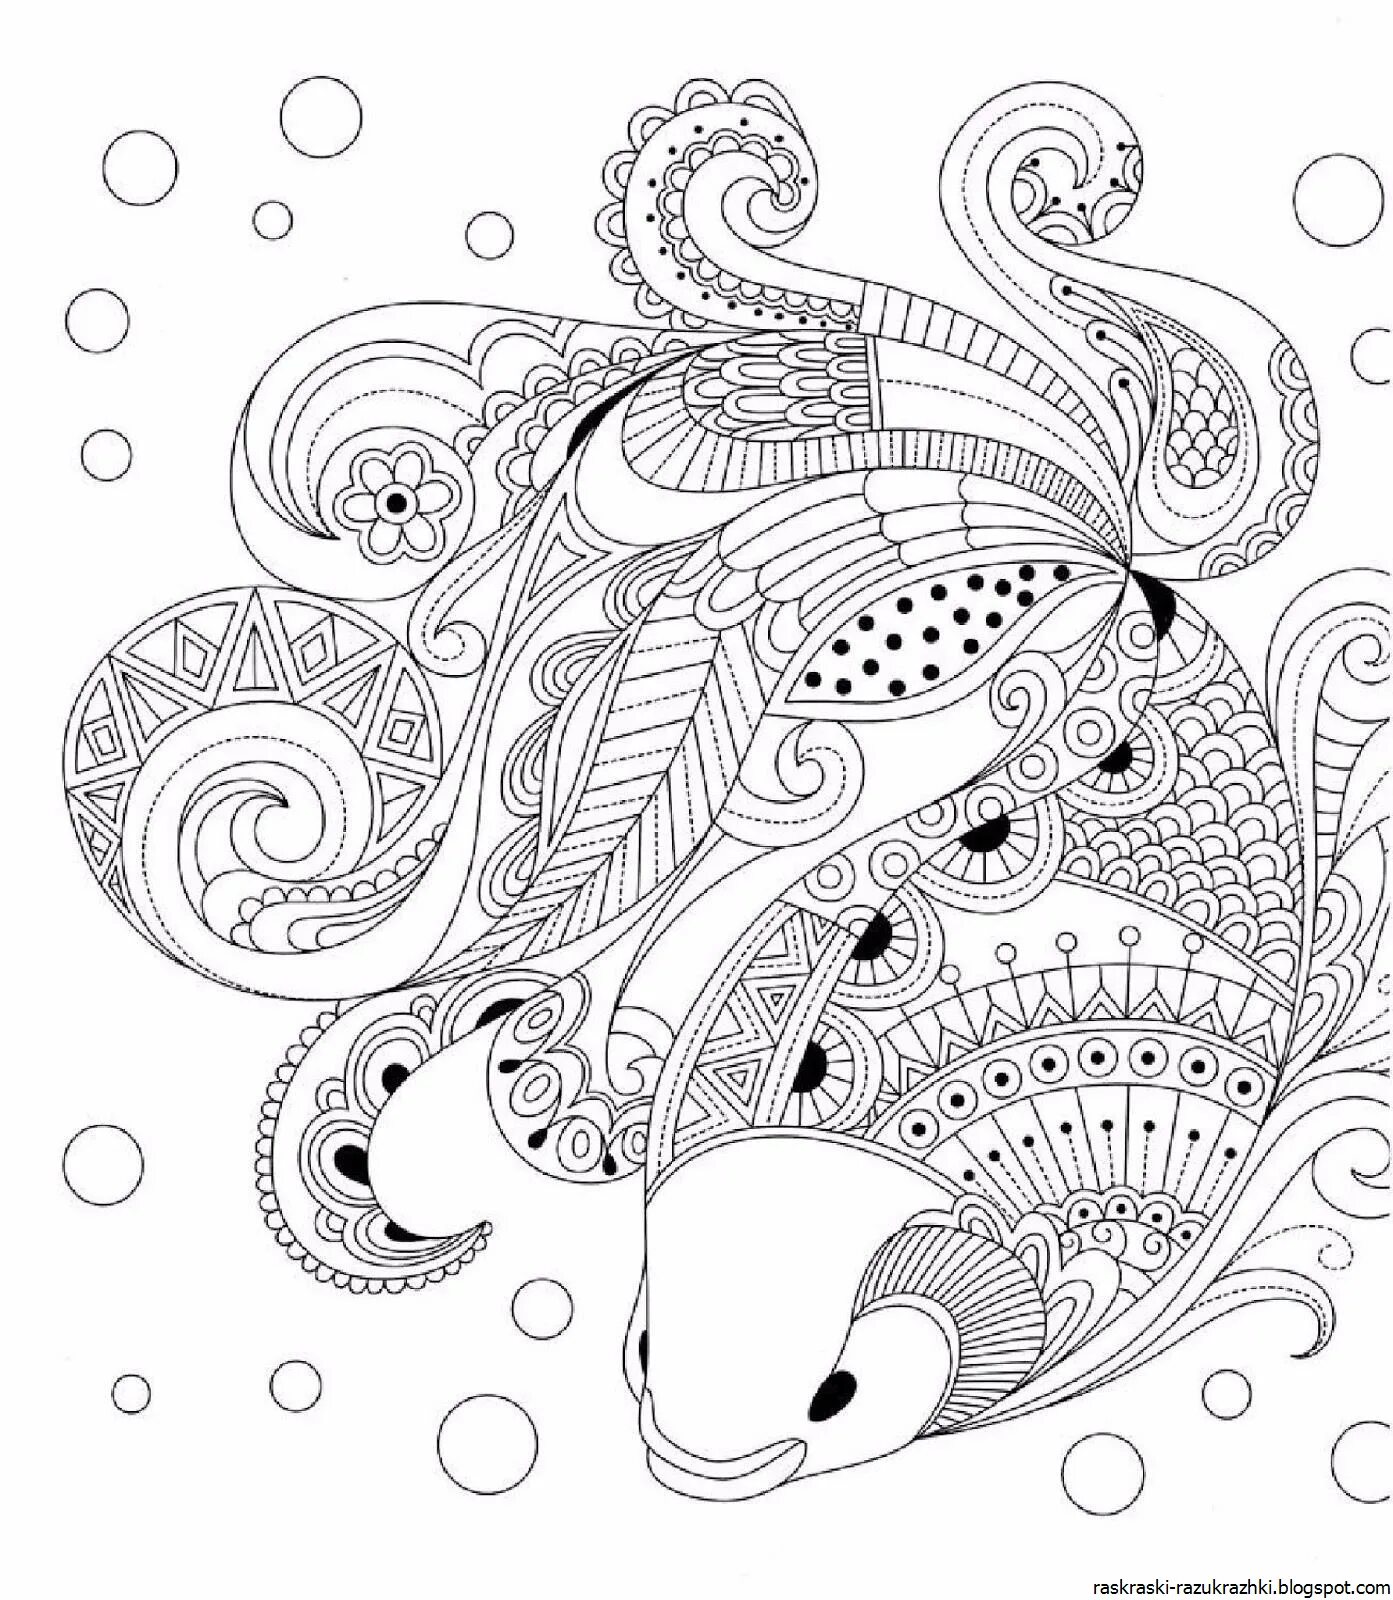 Adorable relaxation coloring book for kids